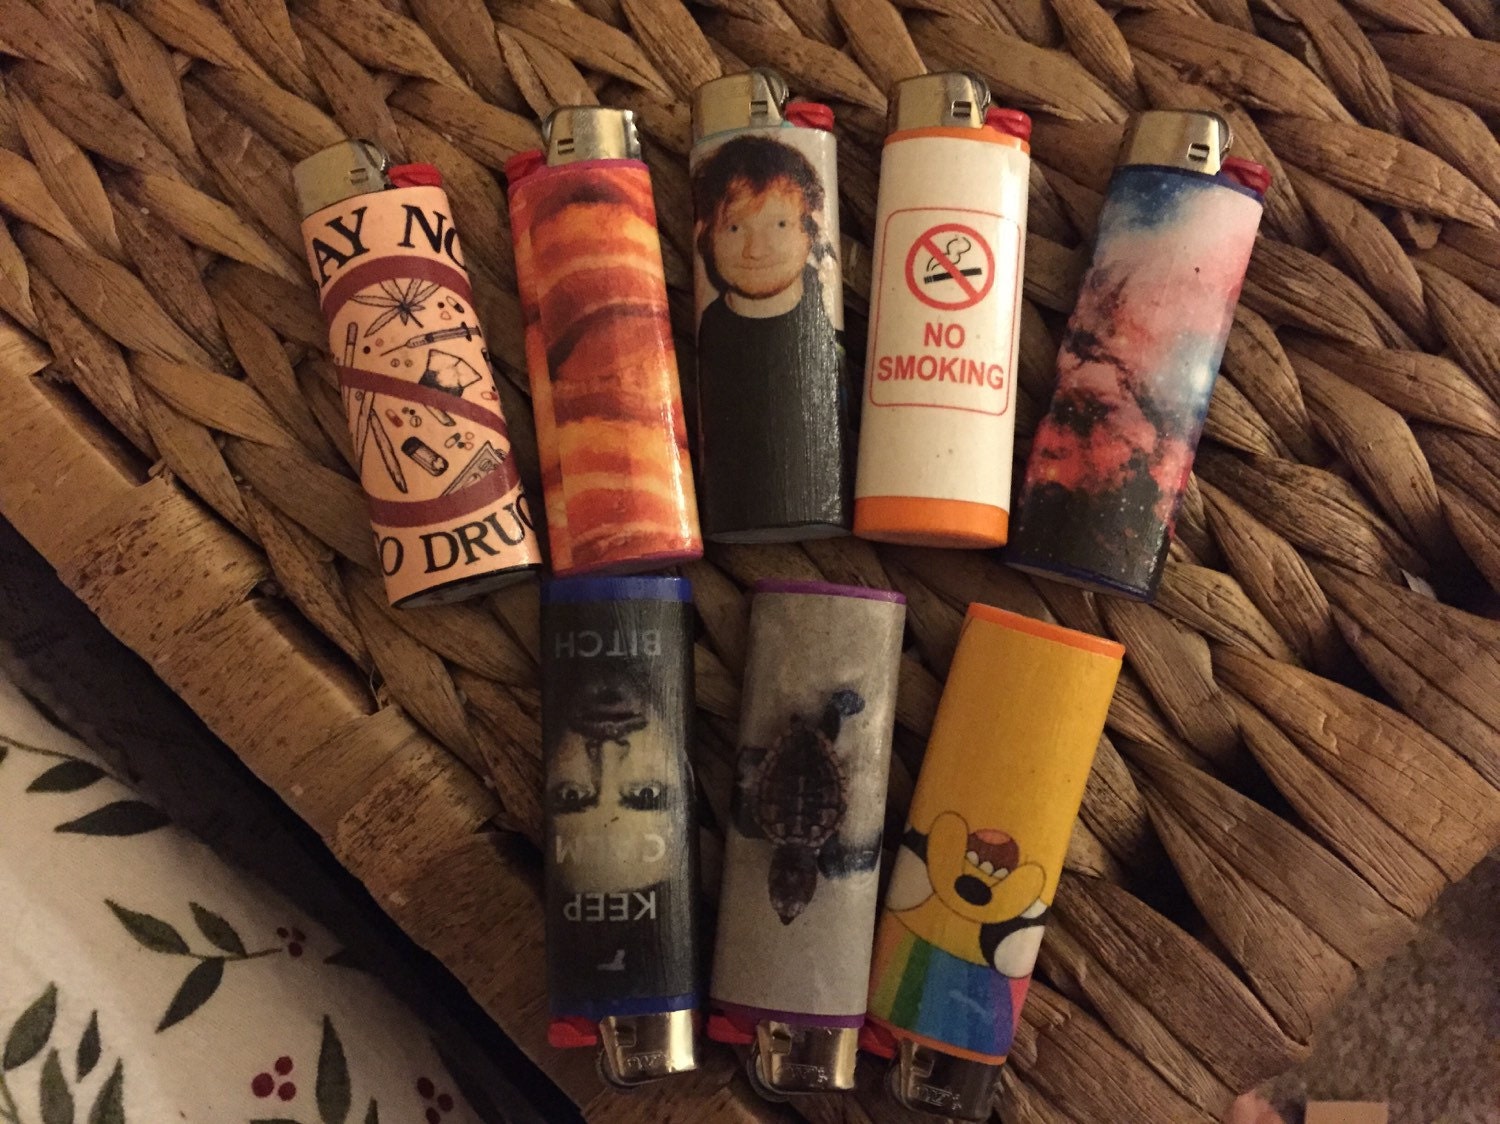 Request your own custom bic lighter by ChloesCoolCustoms on Etsy